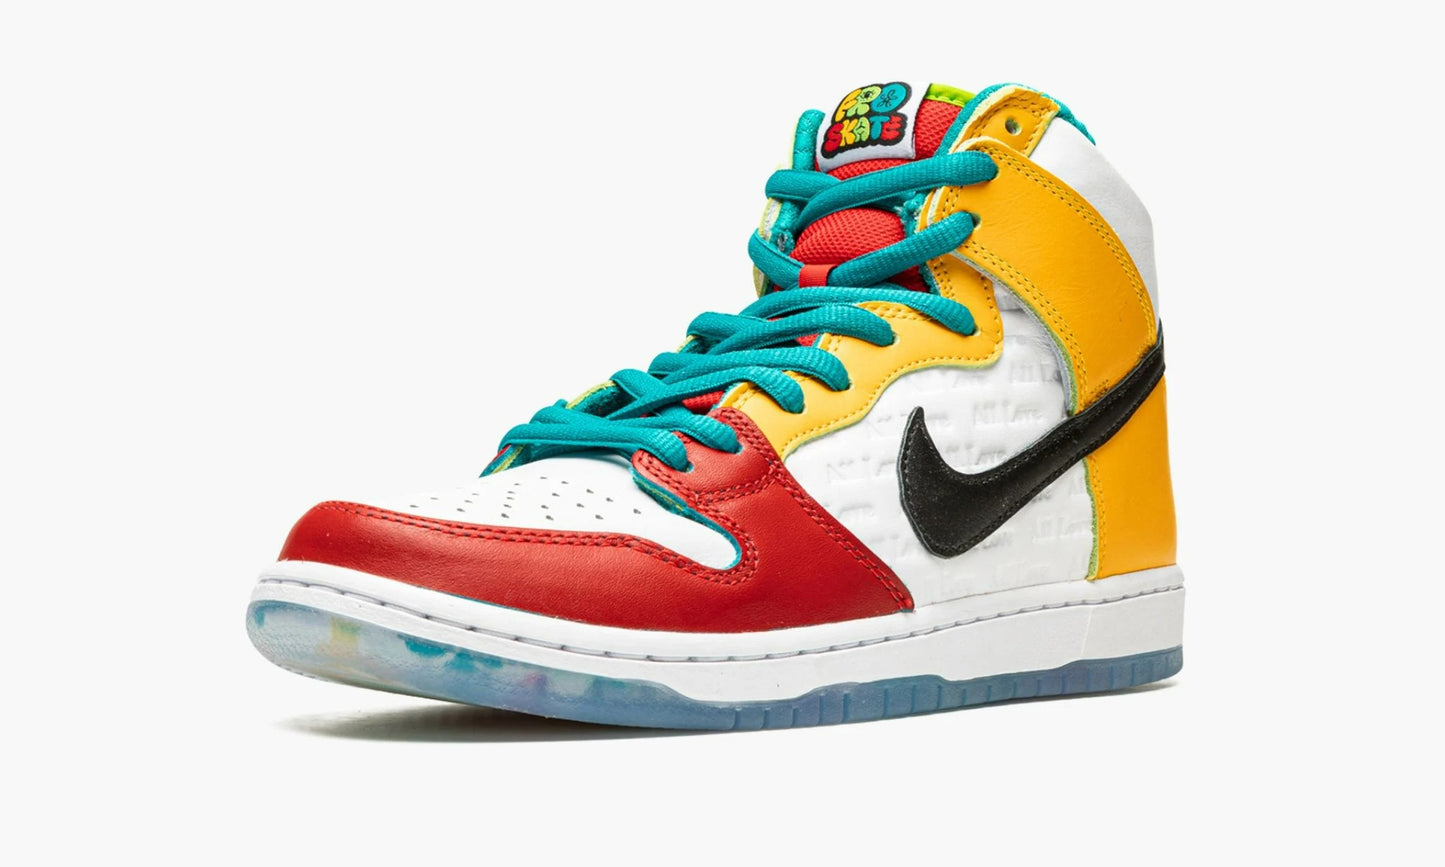 SB Dunk High Pro froSkate All Love - DH7778 100 | The Sortage